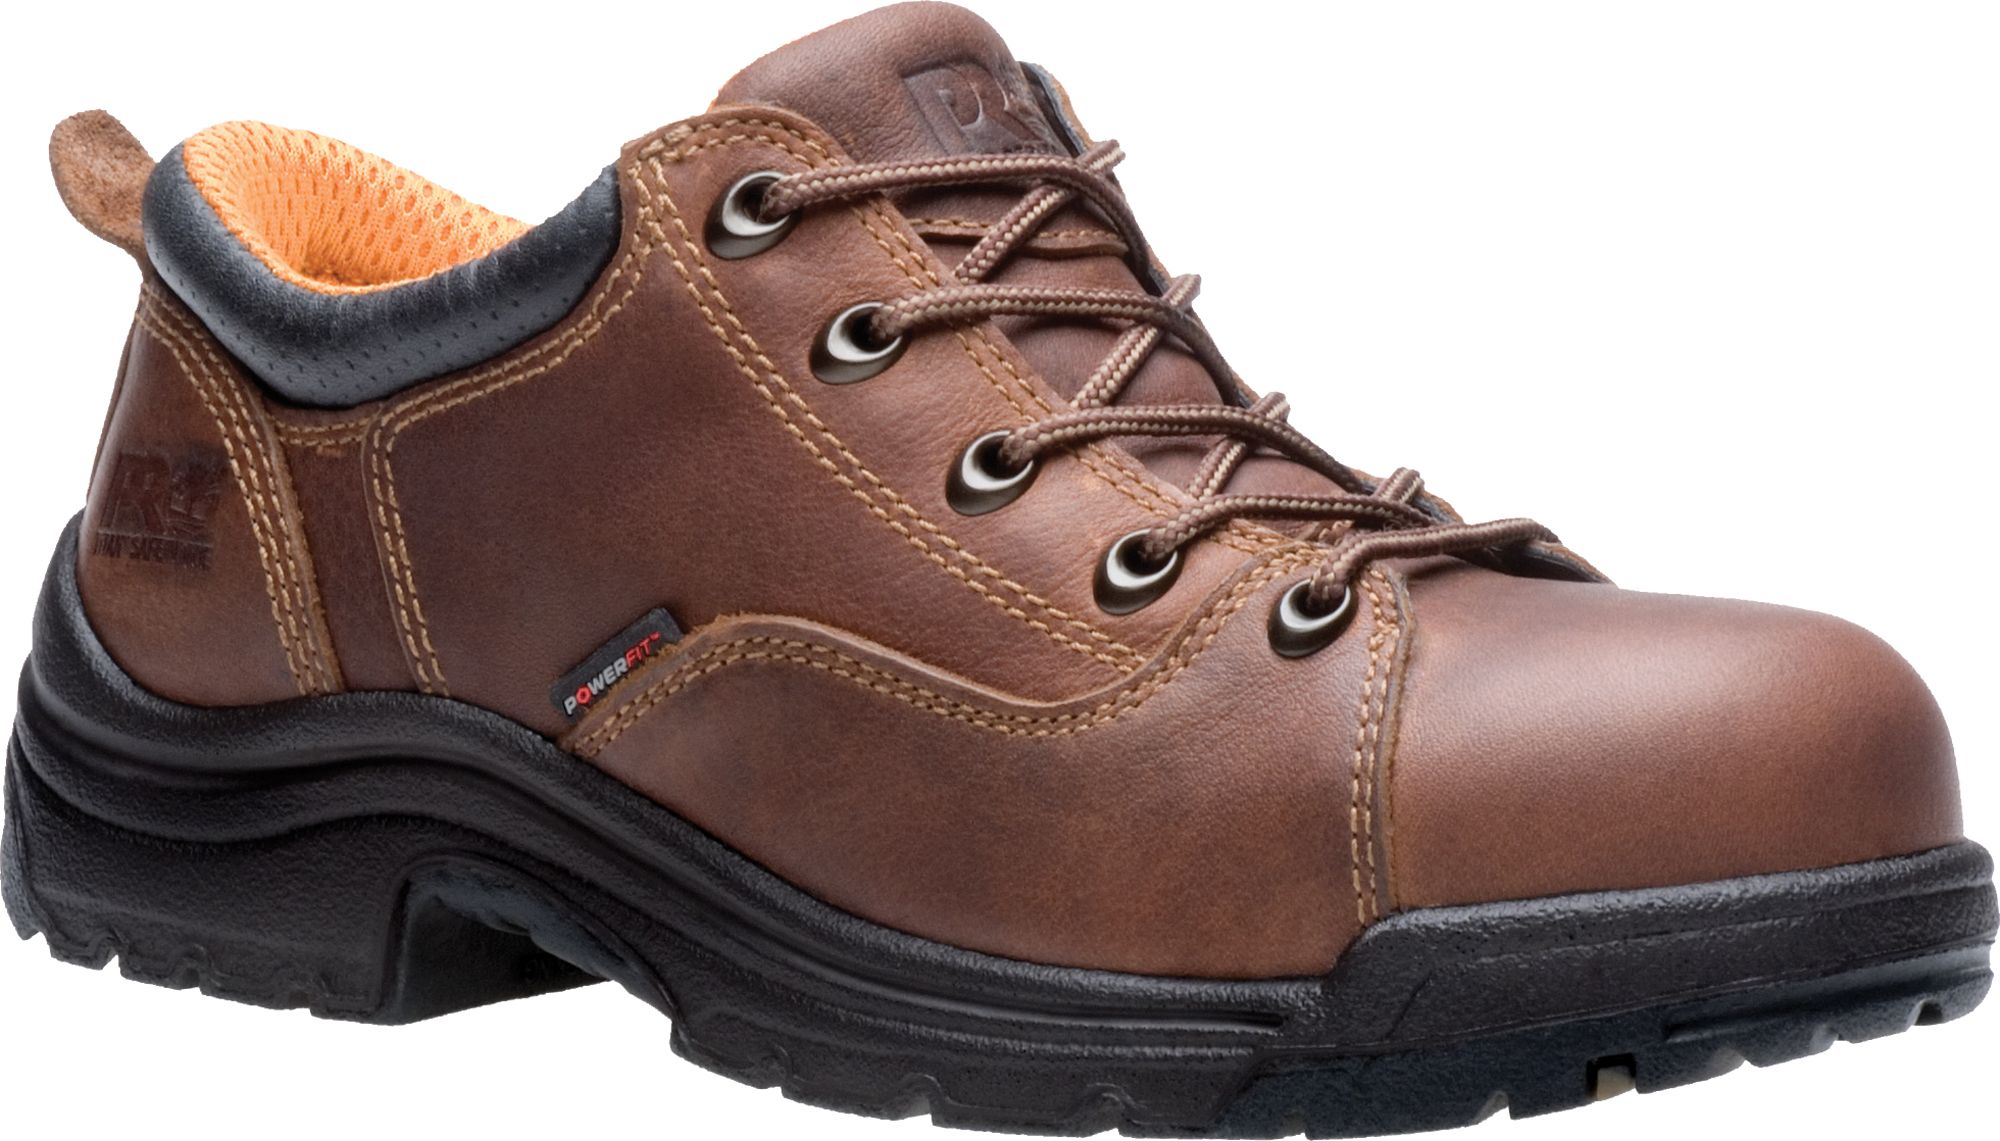 oxford work boots